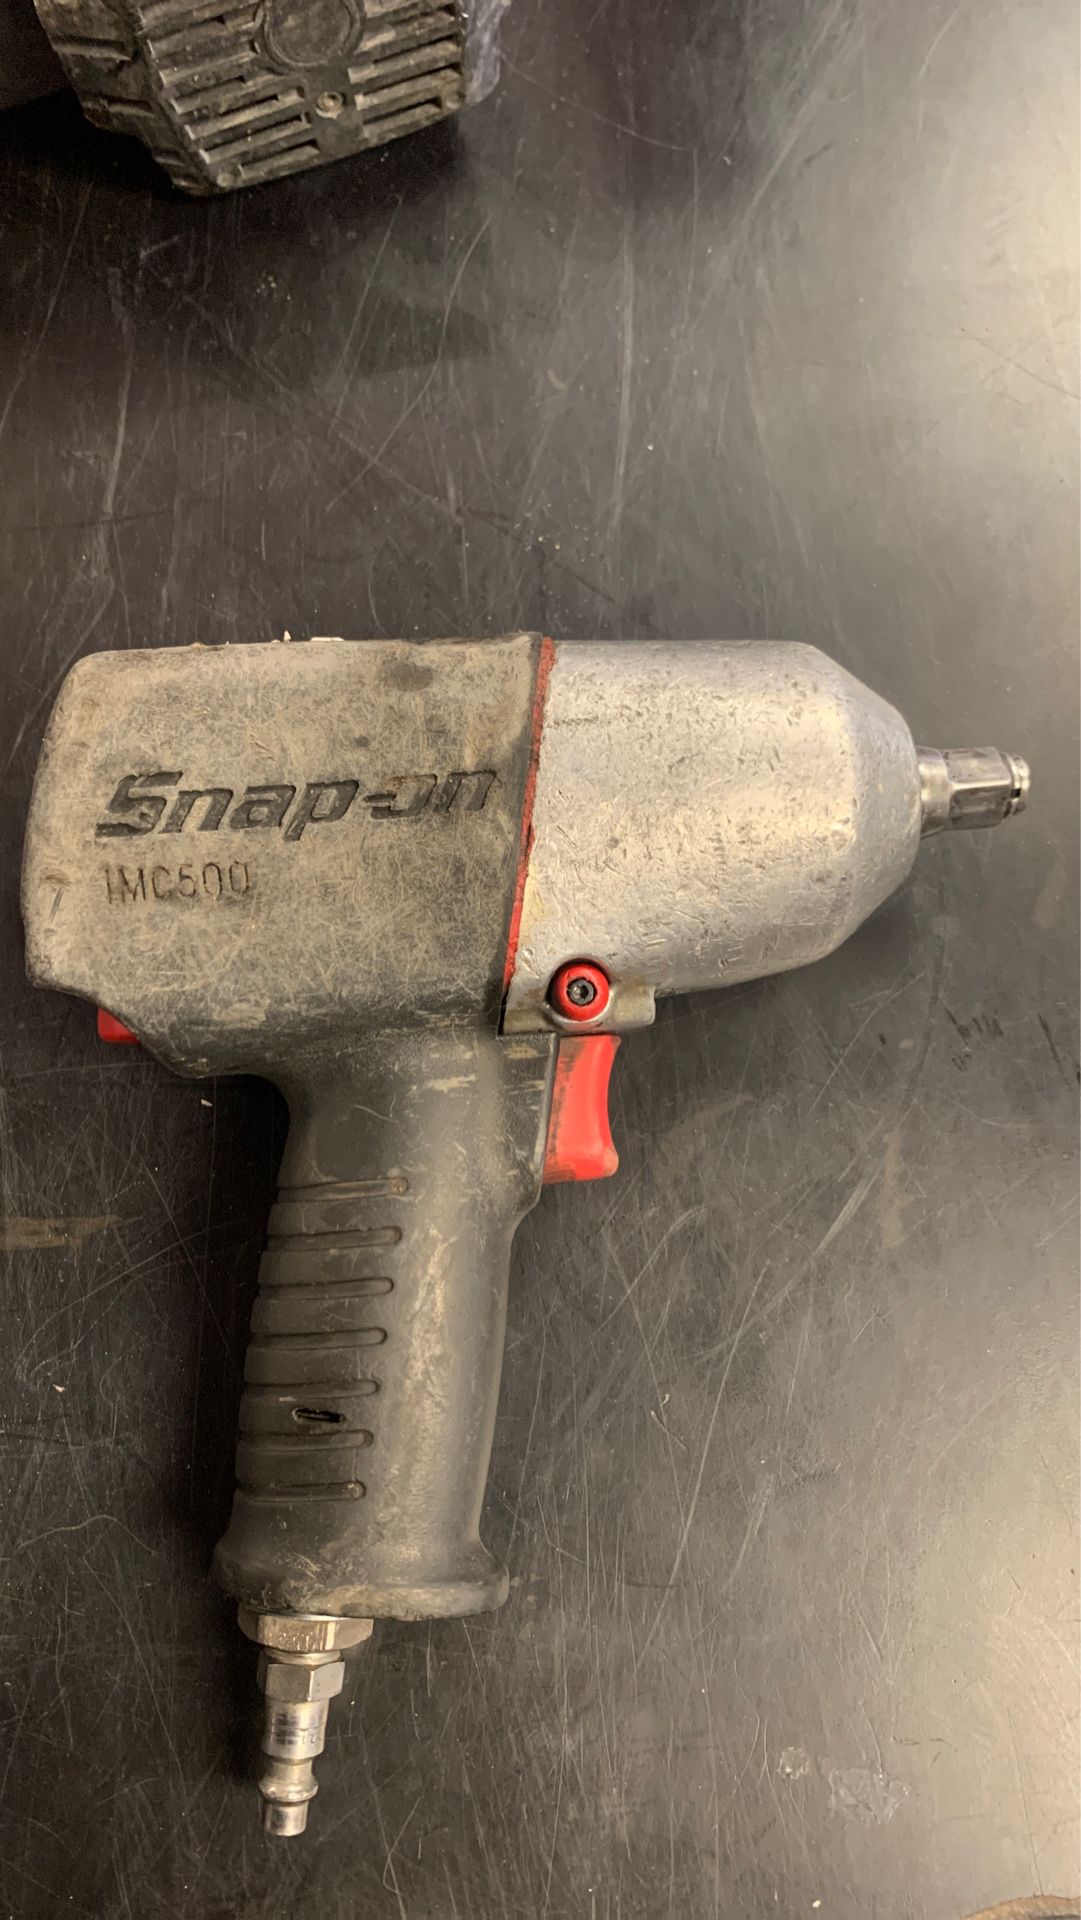 Snap On IMC500 1/2” Drive Impact Wrench